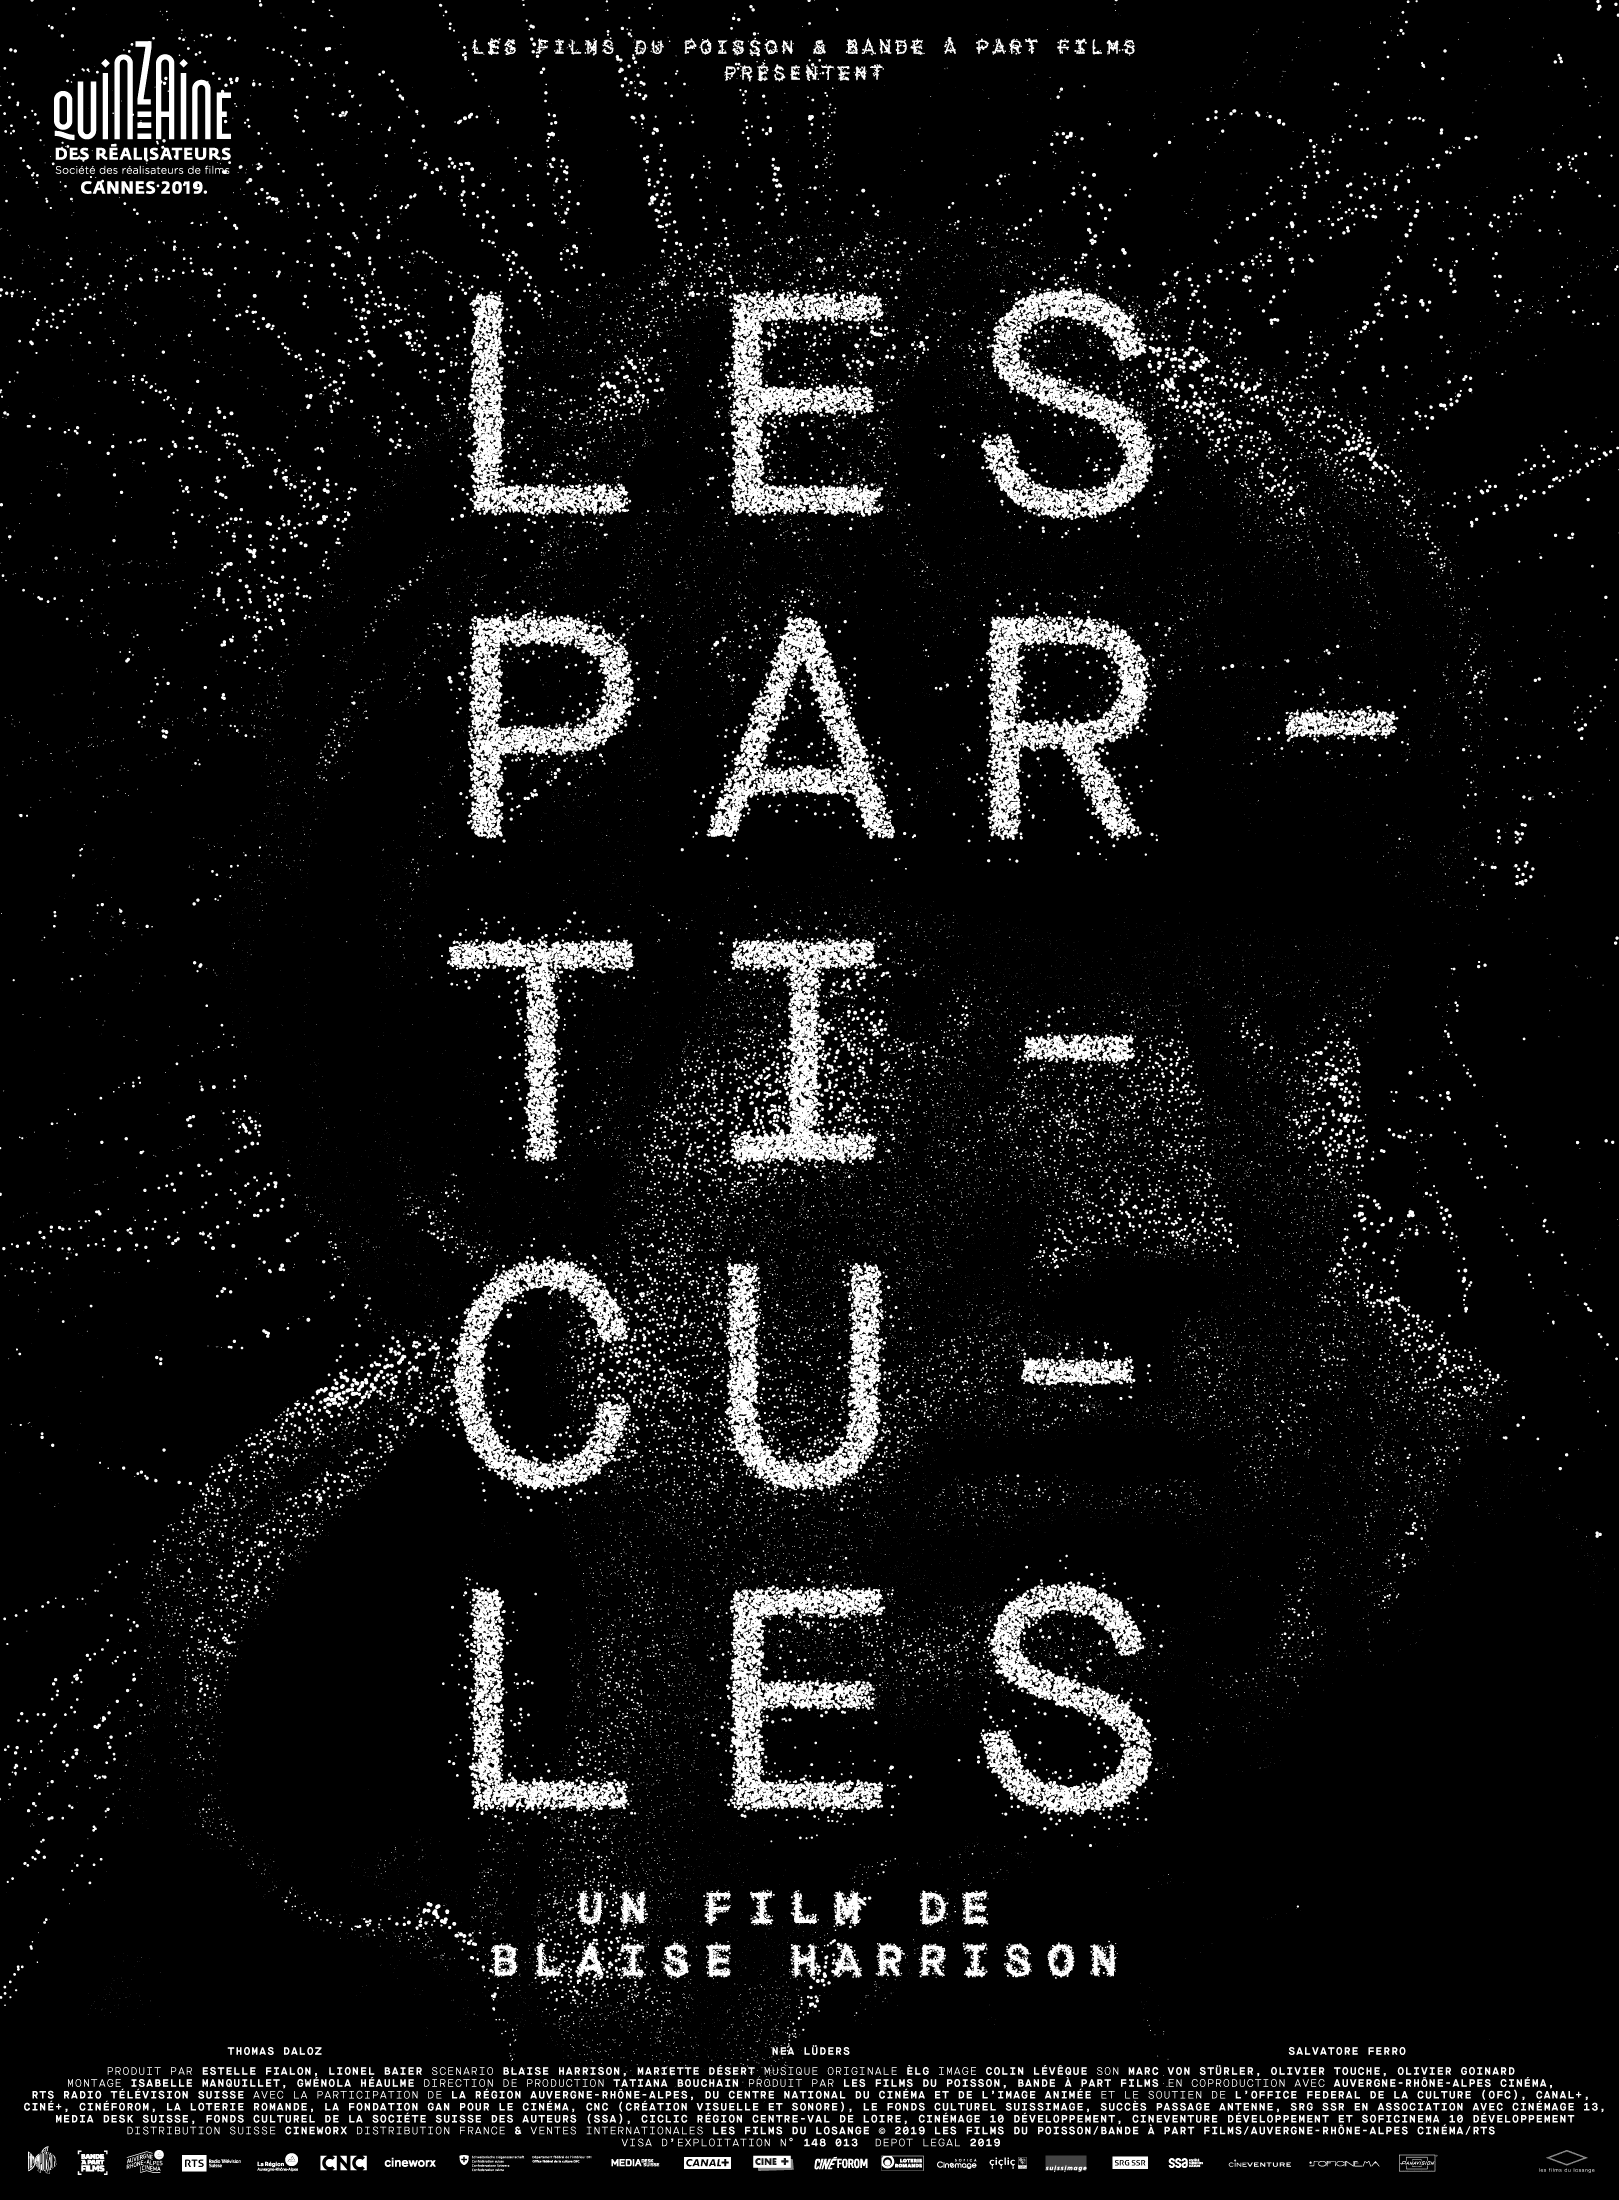 Detail of “Les Particules” movie poster